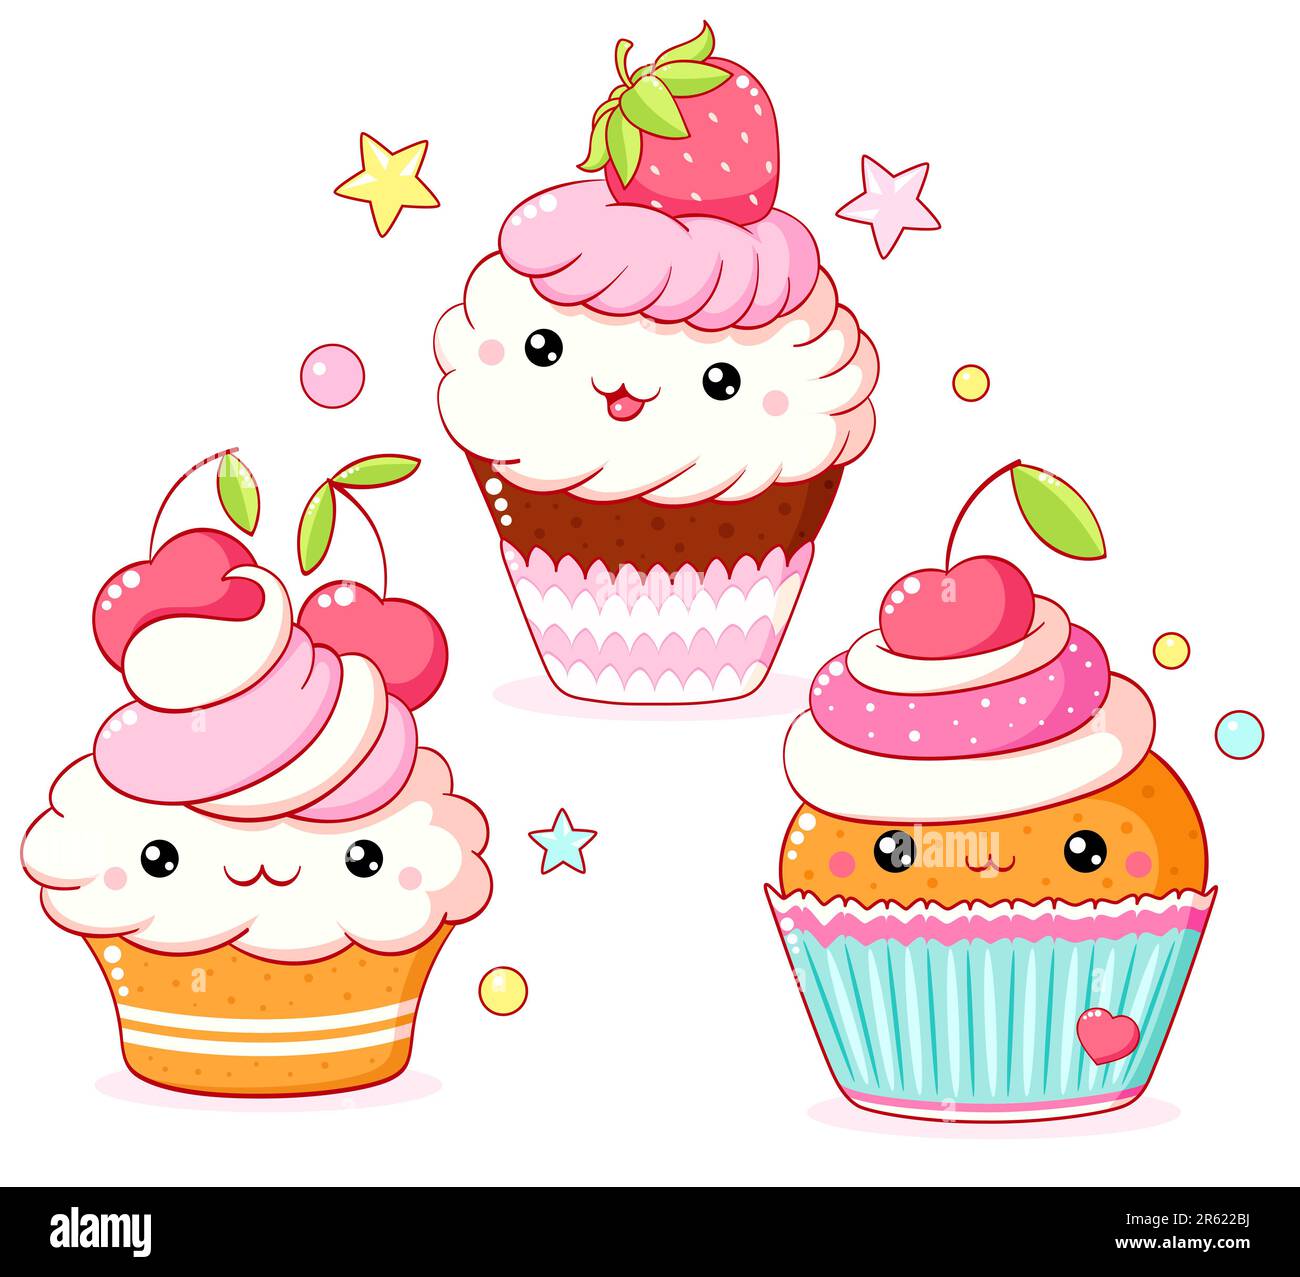 Set of cute sweet desserts in kawaii style with smiling face and pink cheeks. Cake, muffin and cupcake with whipped cream, cherry and strawberry. Vect Stock Photo